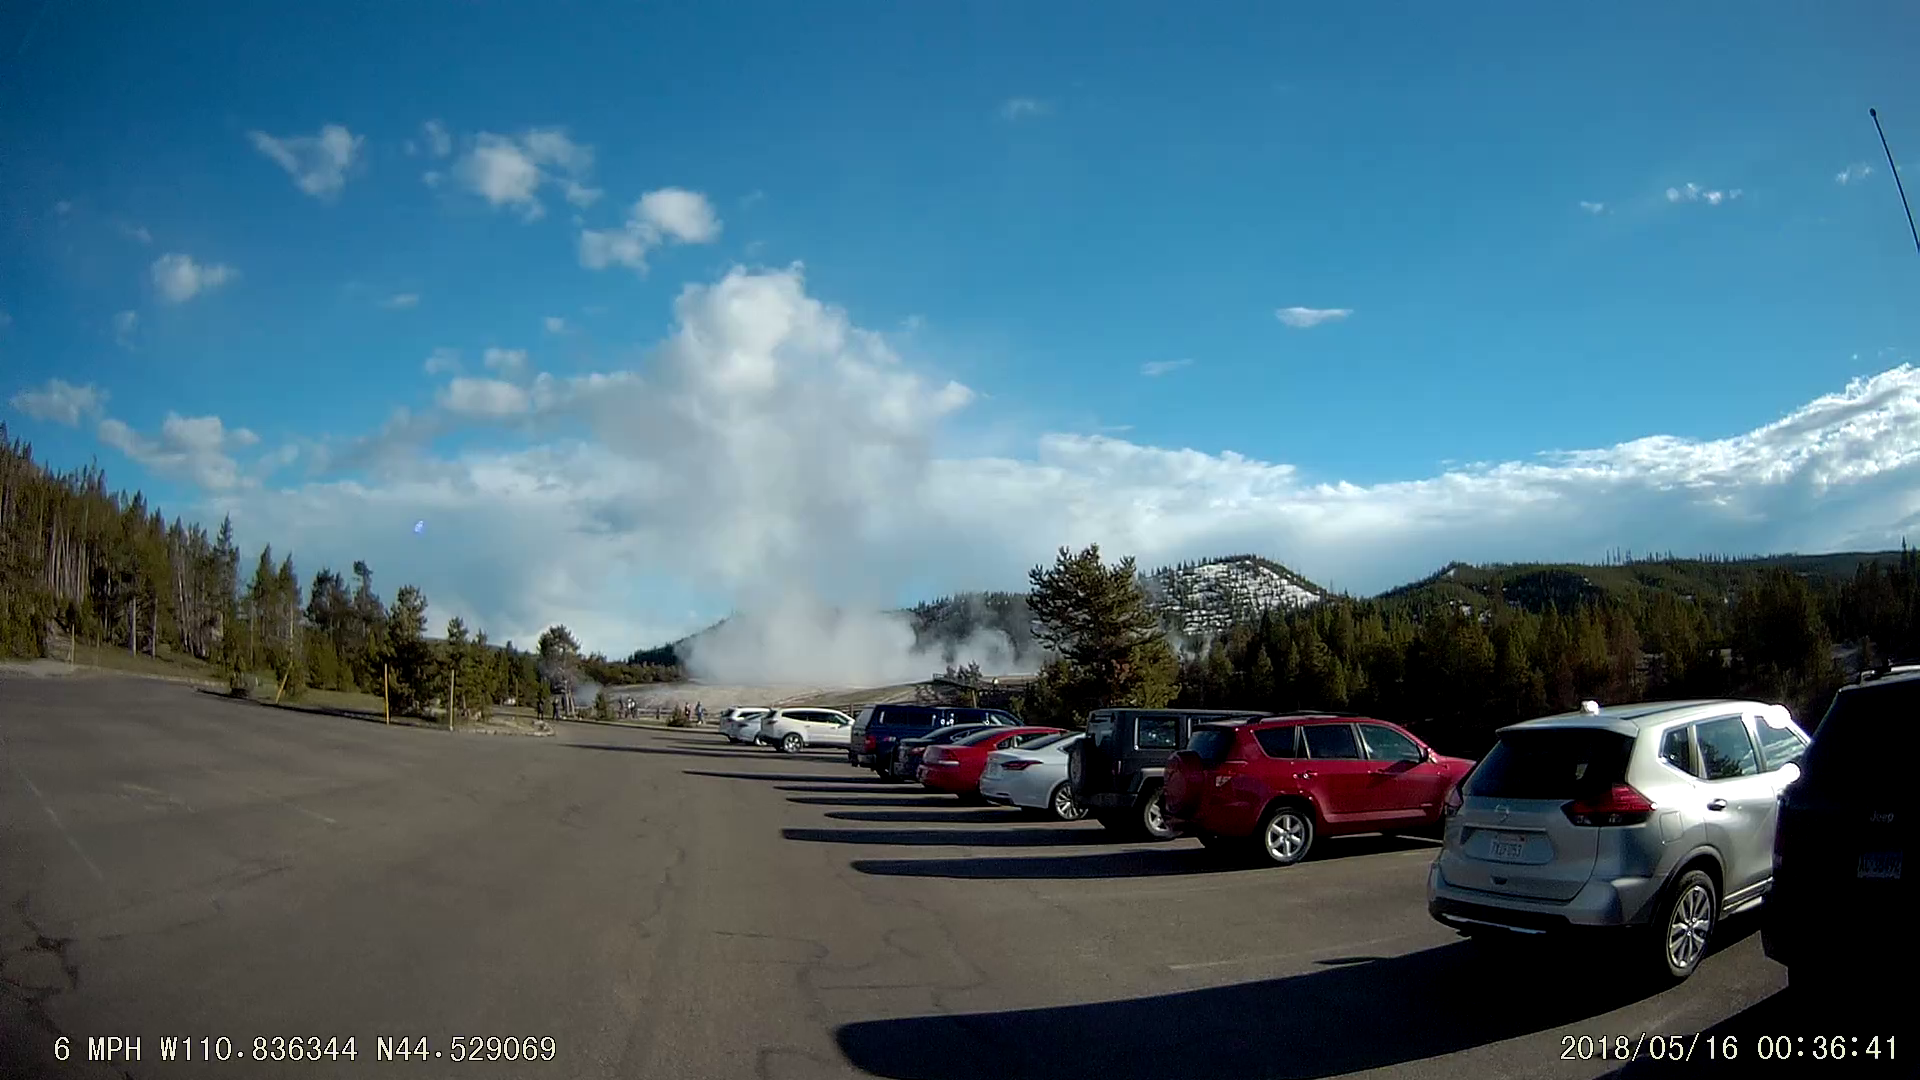 a screencap from dashcam footage showing a geyser erupting from a parking lot in Yellowstone National Park